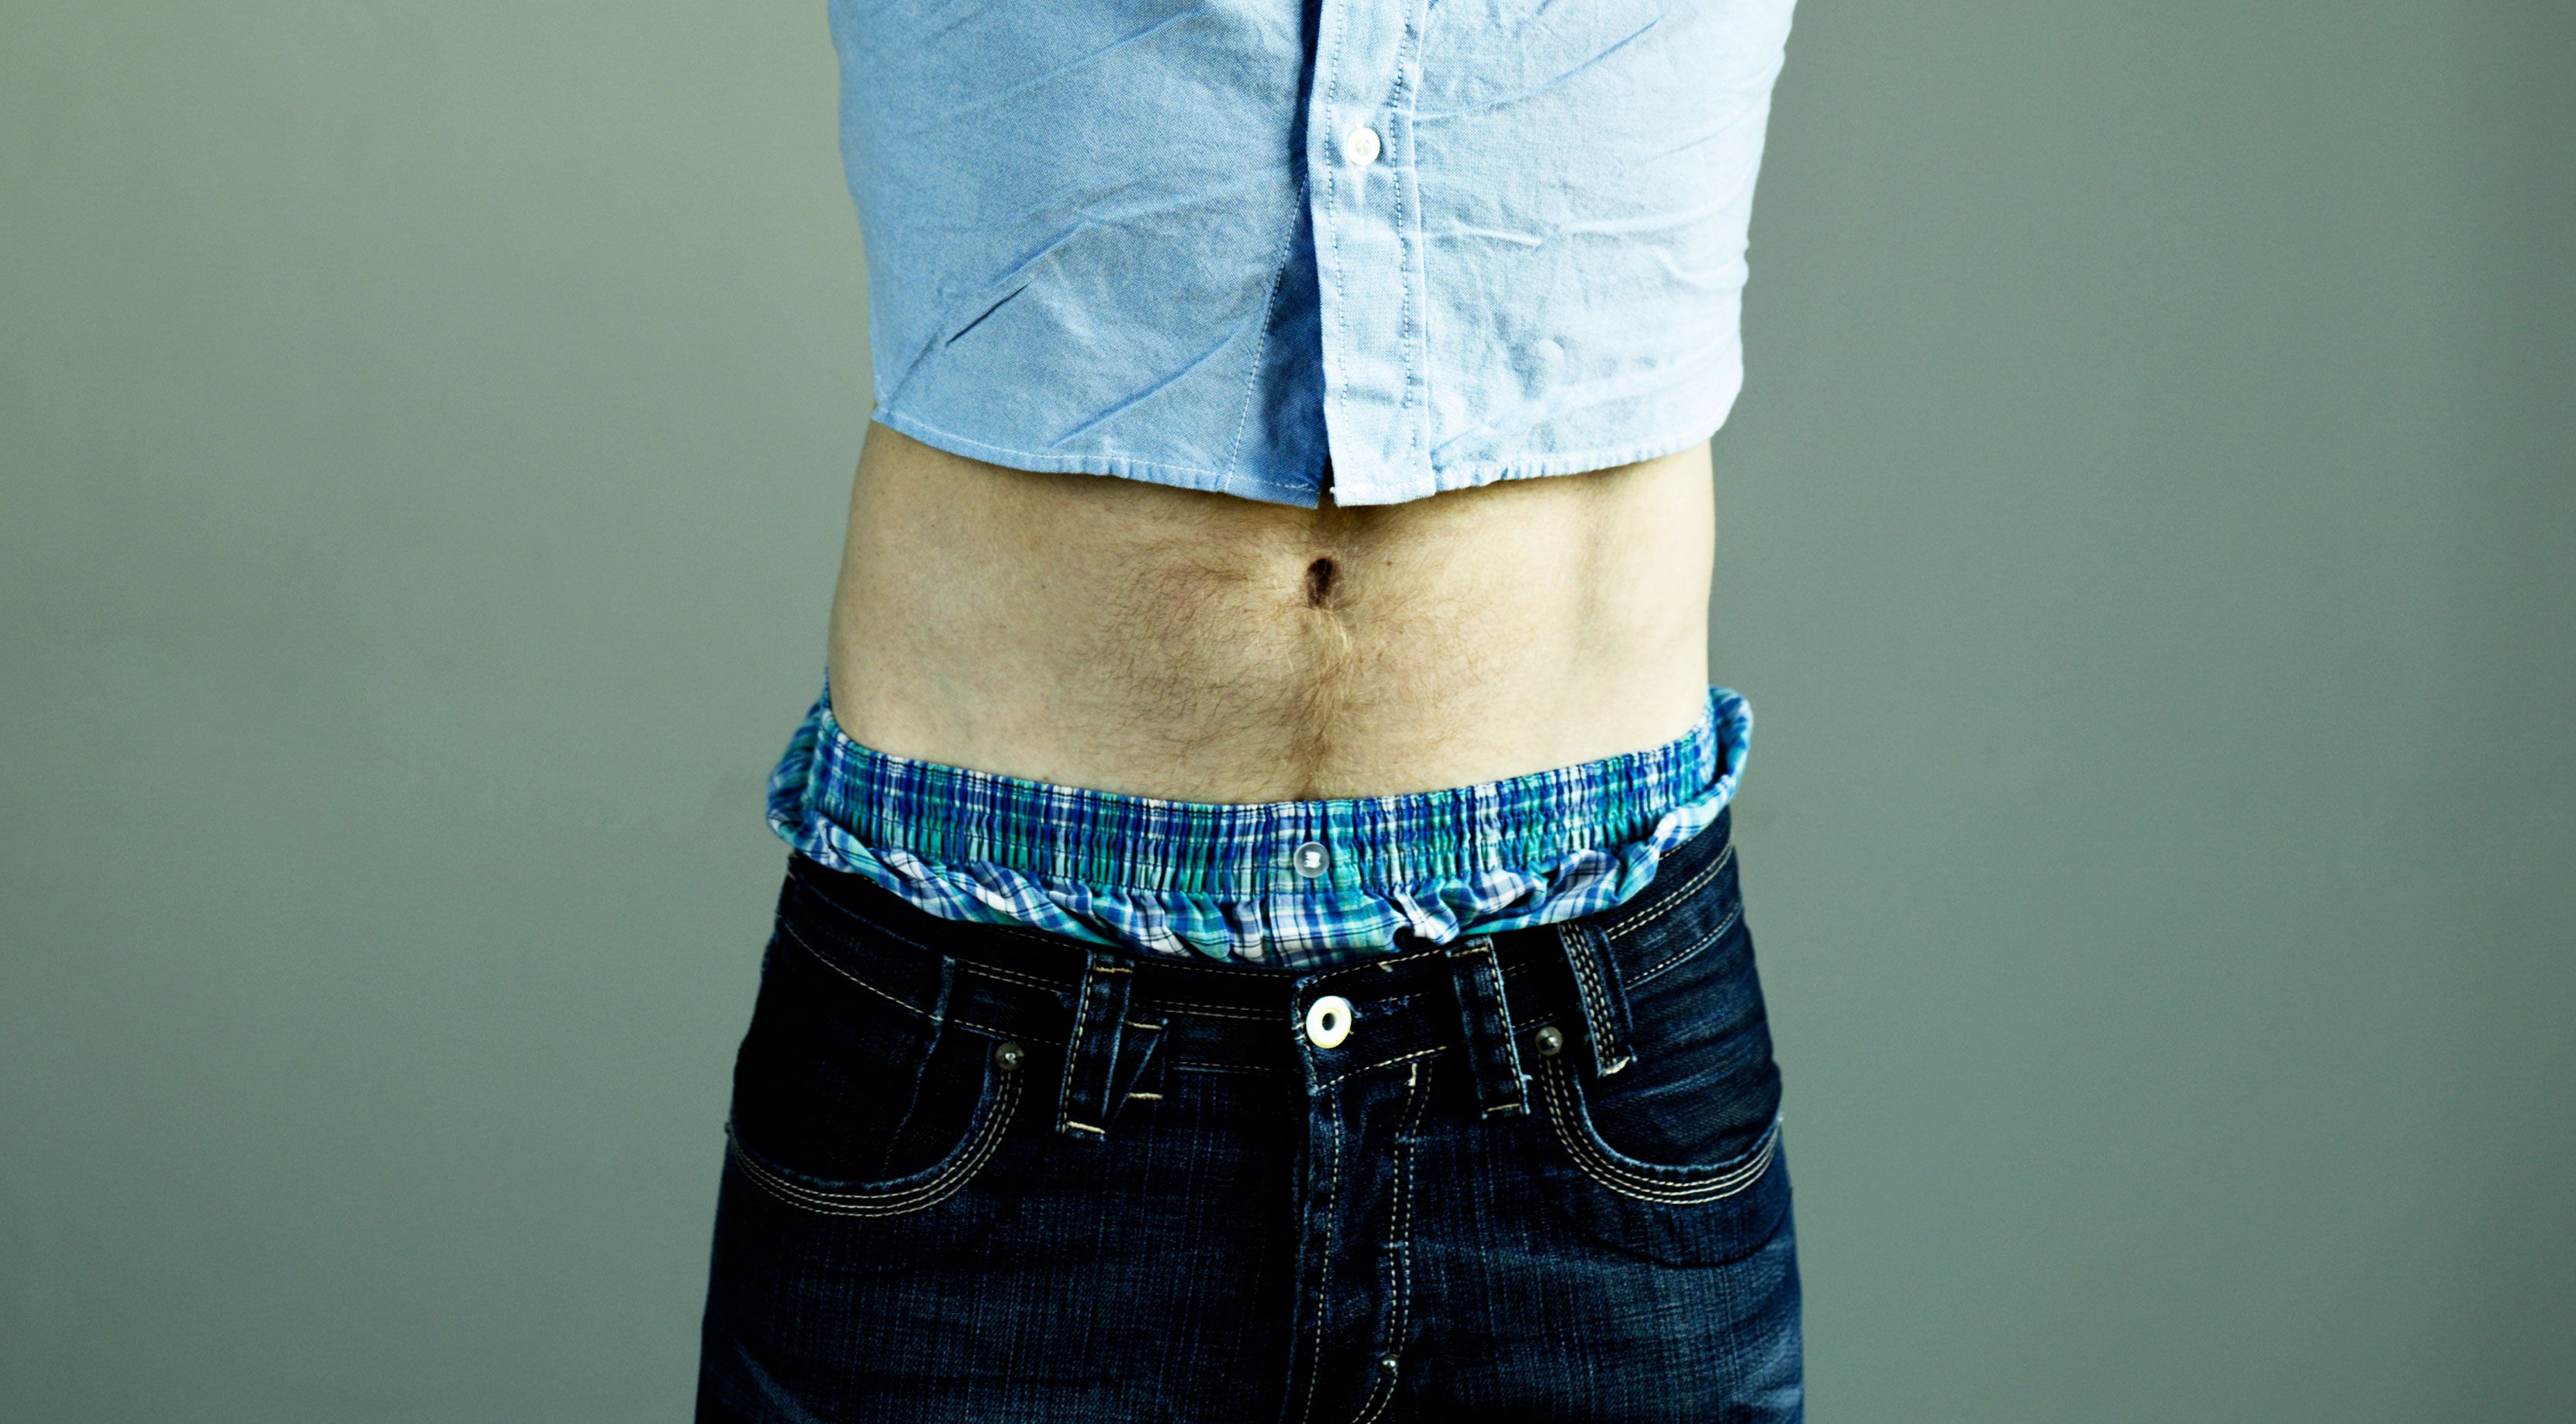 Experts say men don't need to change underwear every day